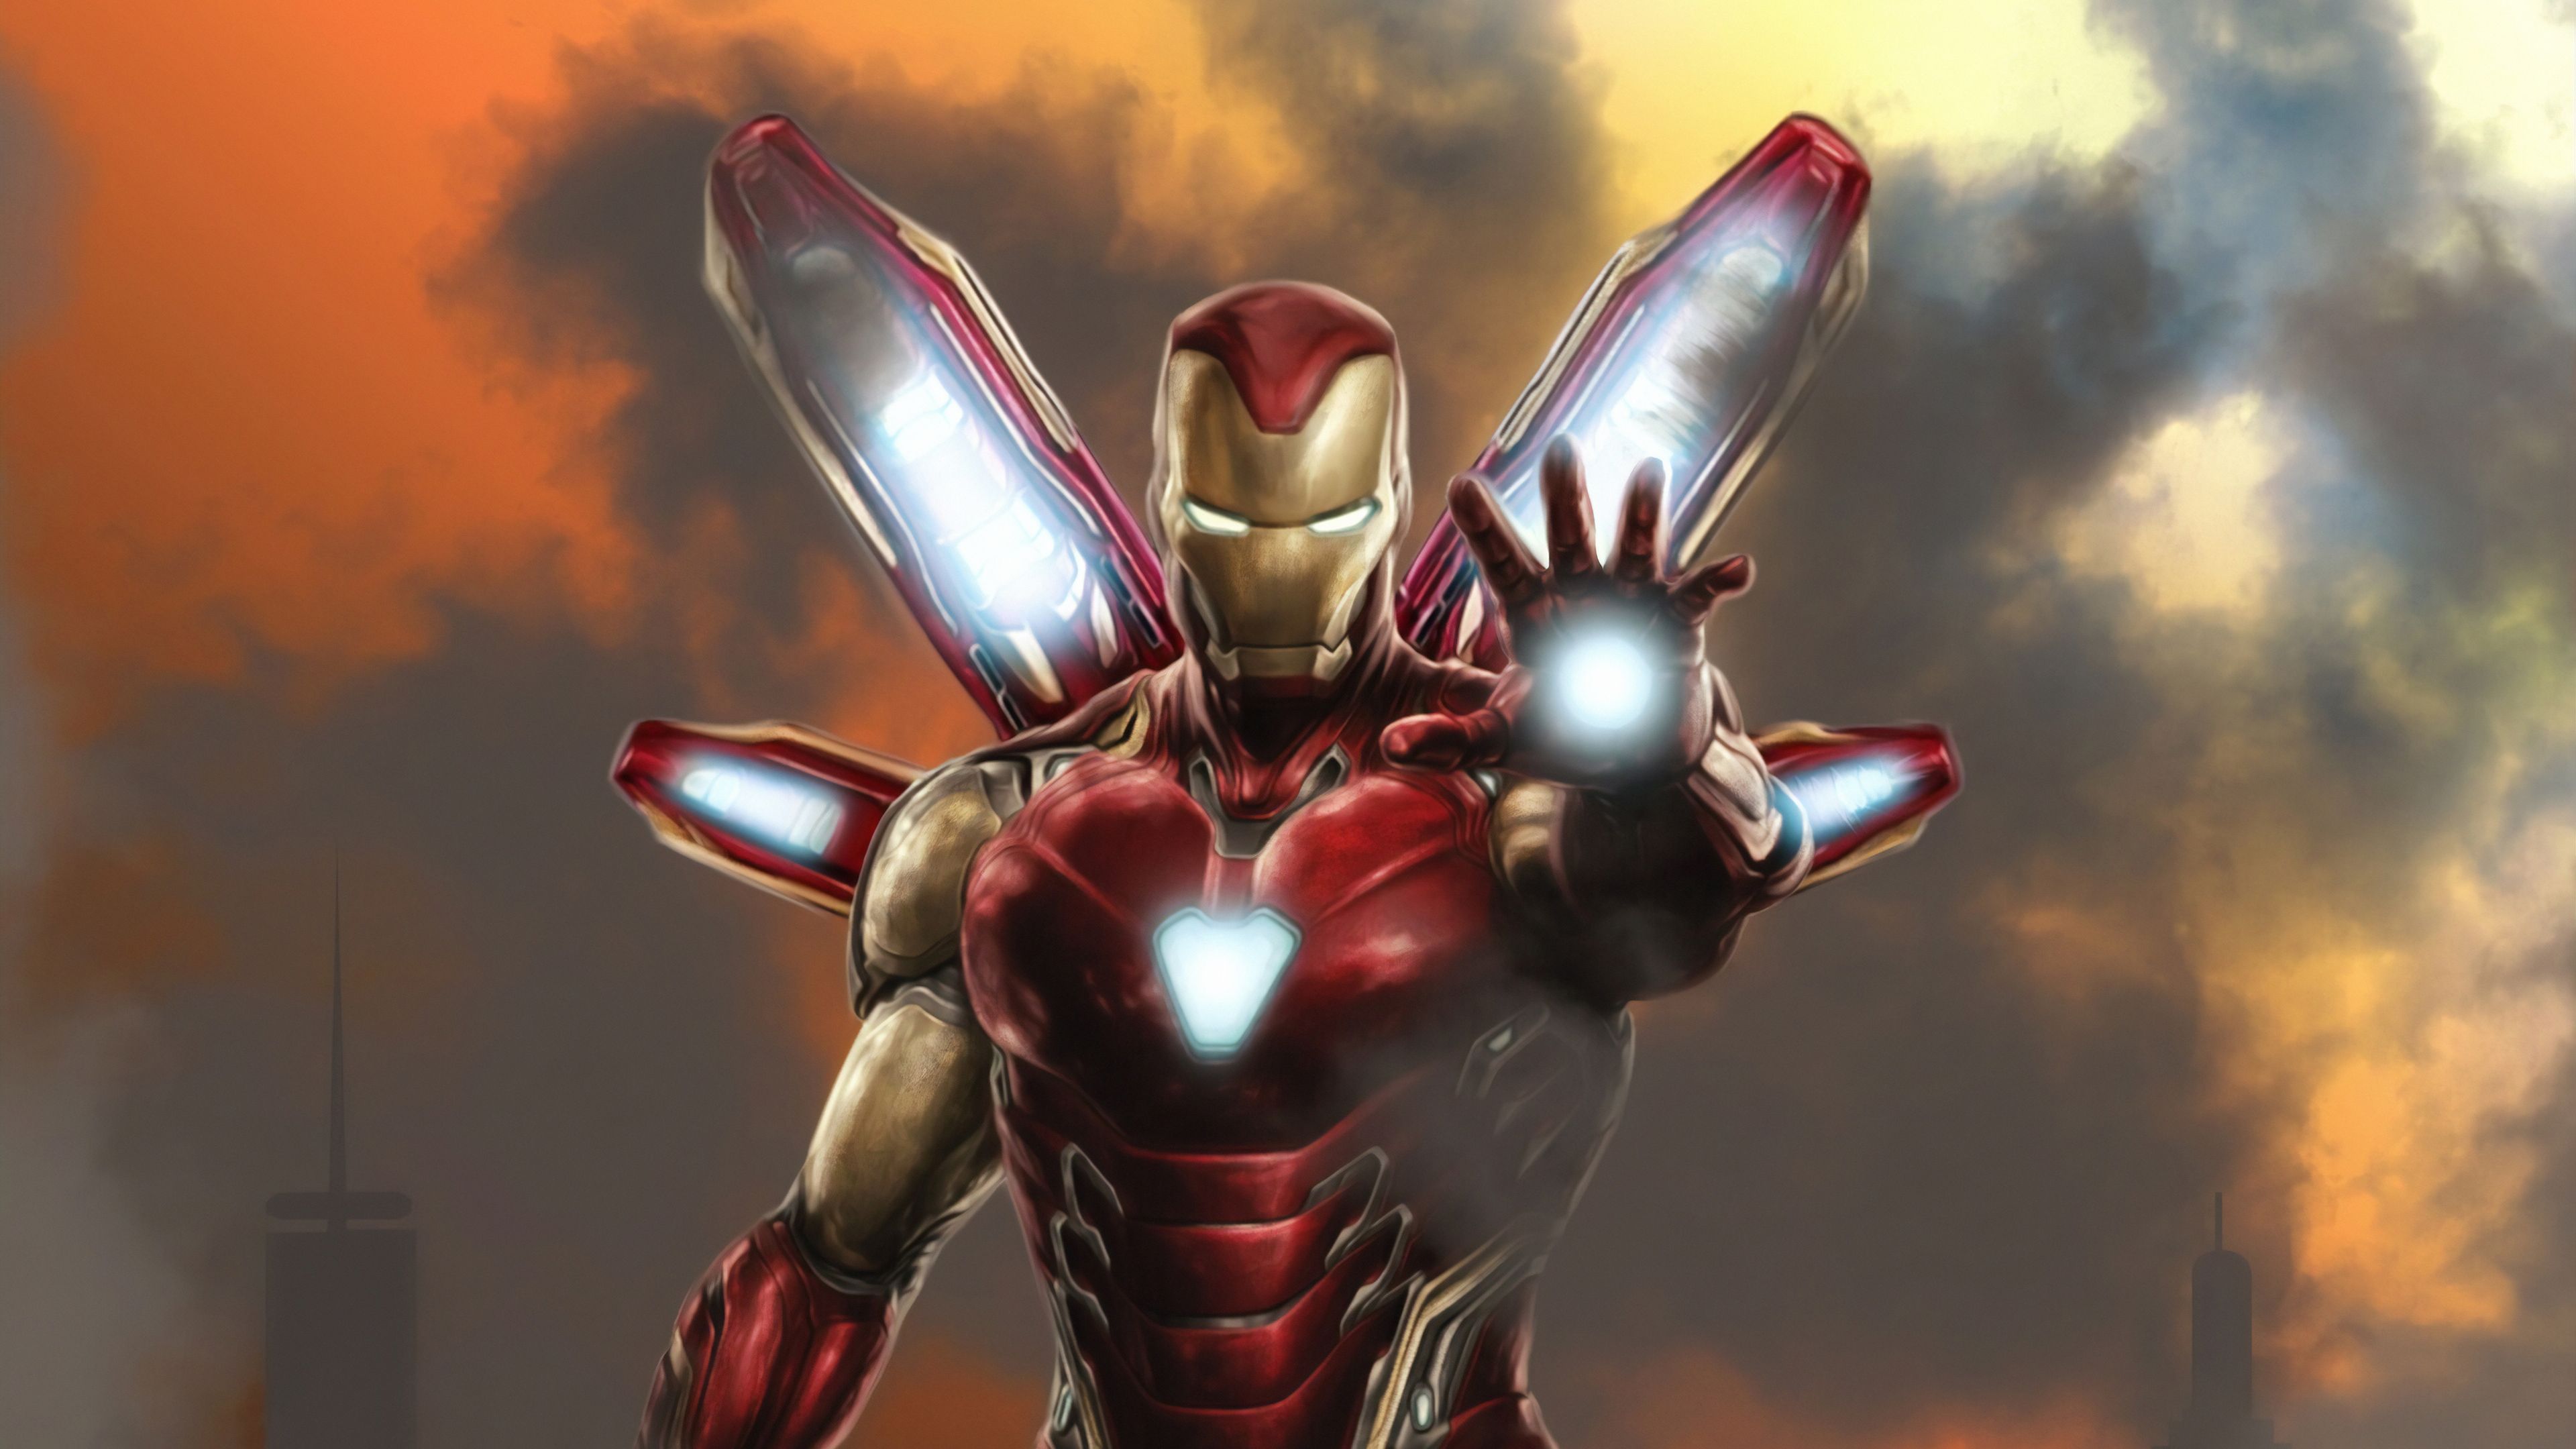 New Suit Iron Man, HD Superheroes, 4k Wallpaper, Image, Background, Photo and Picture